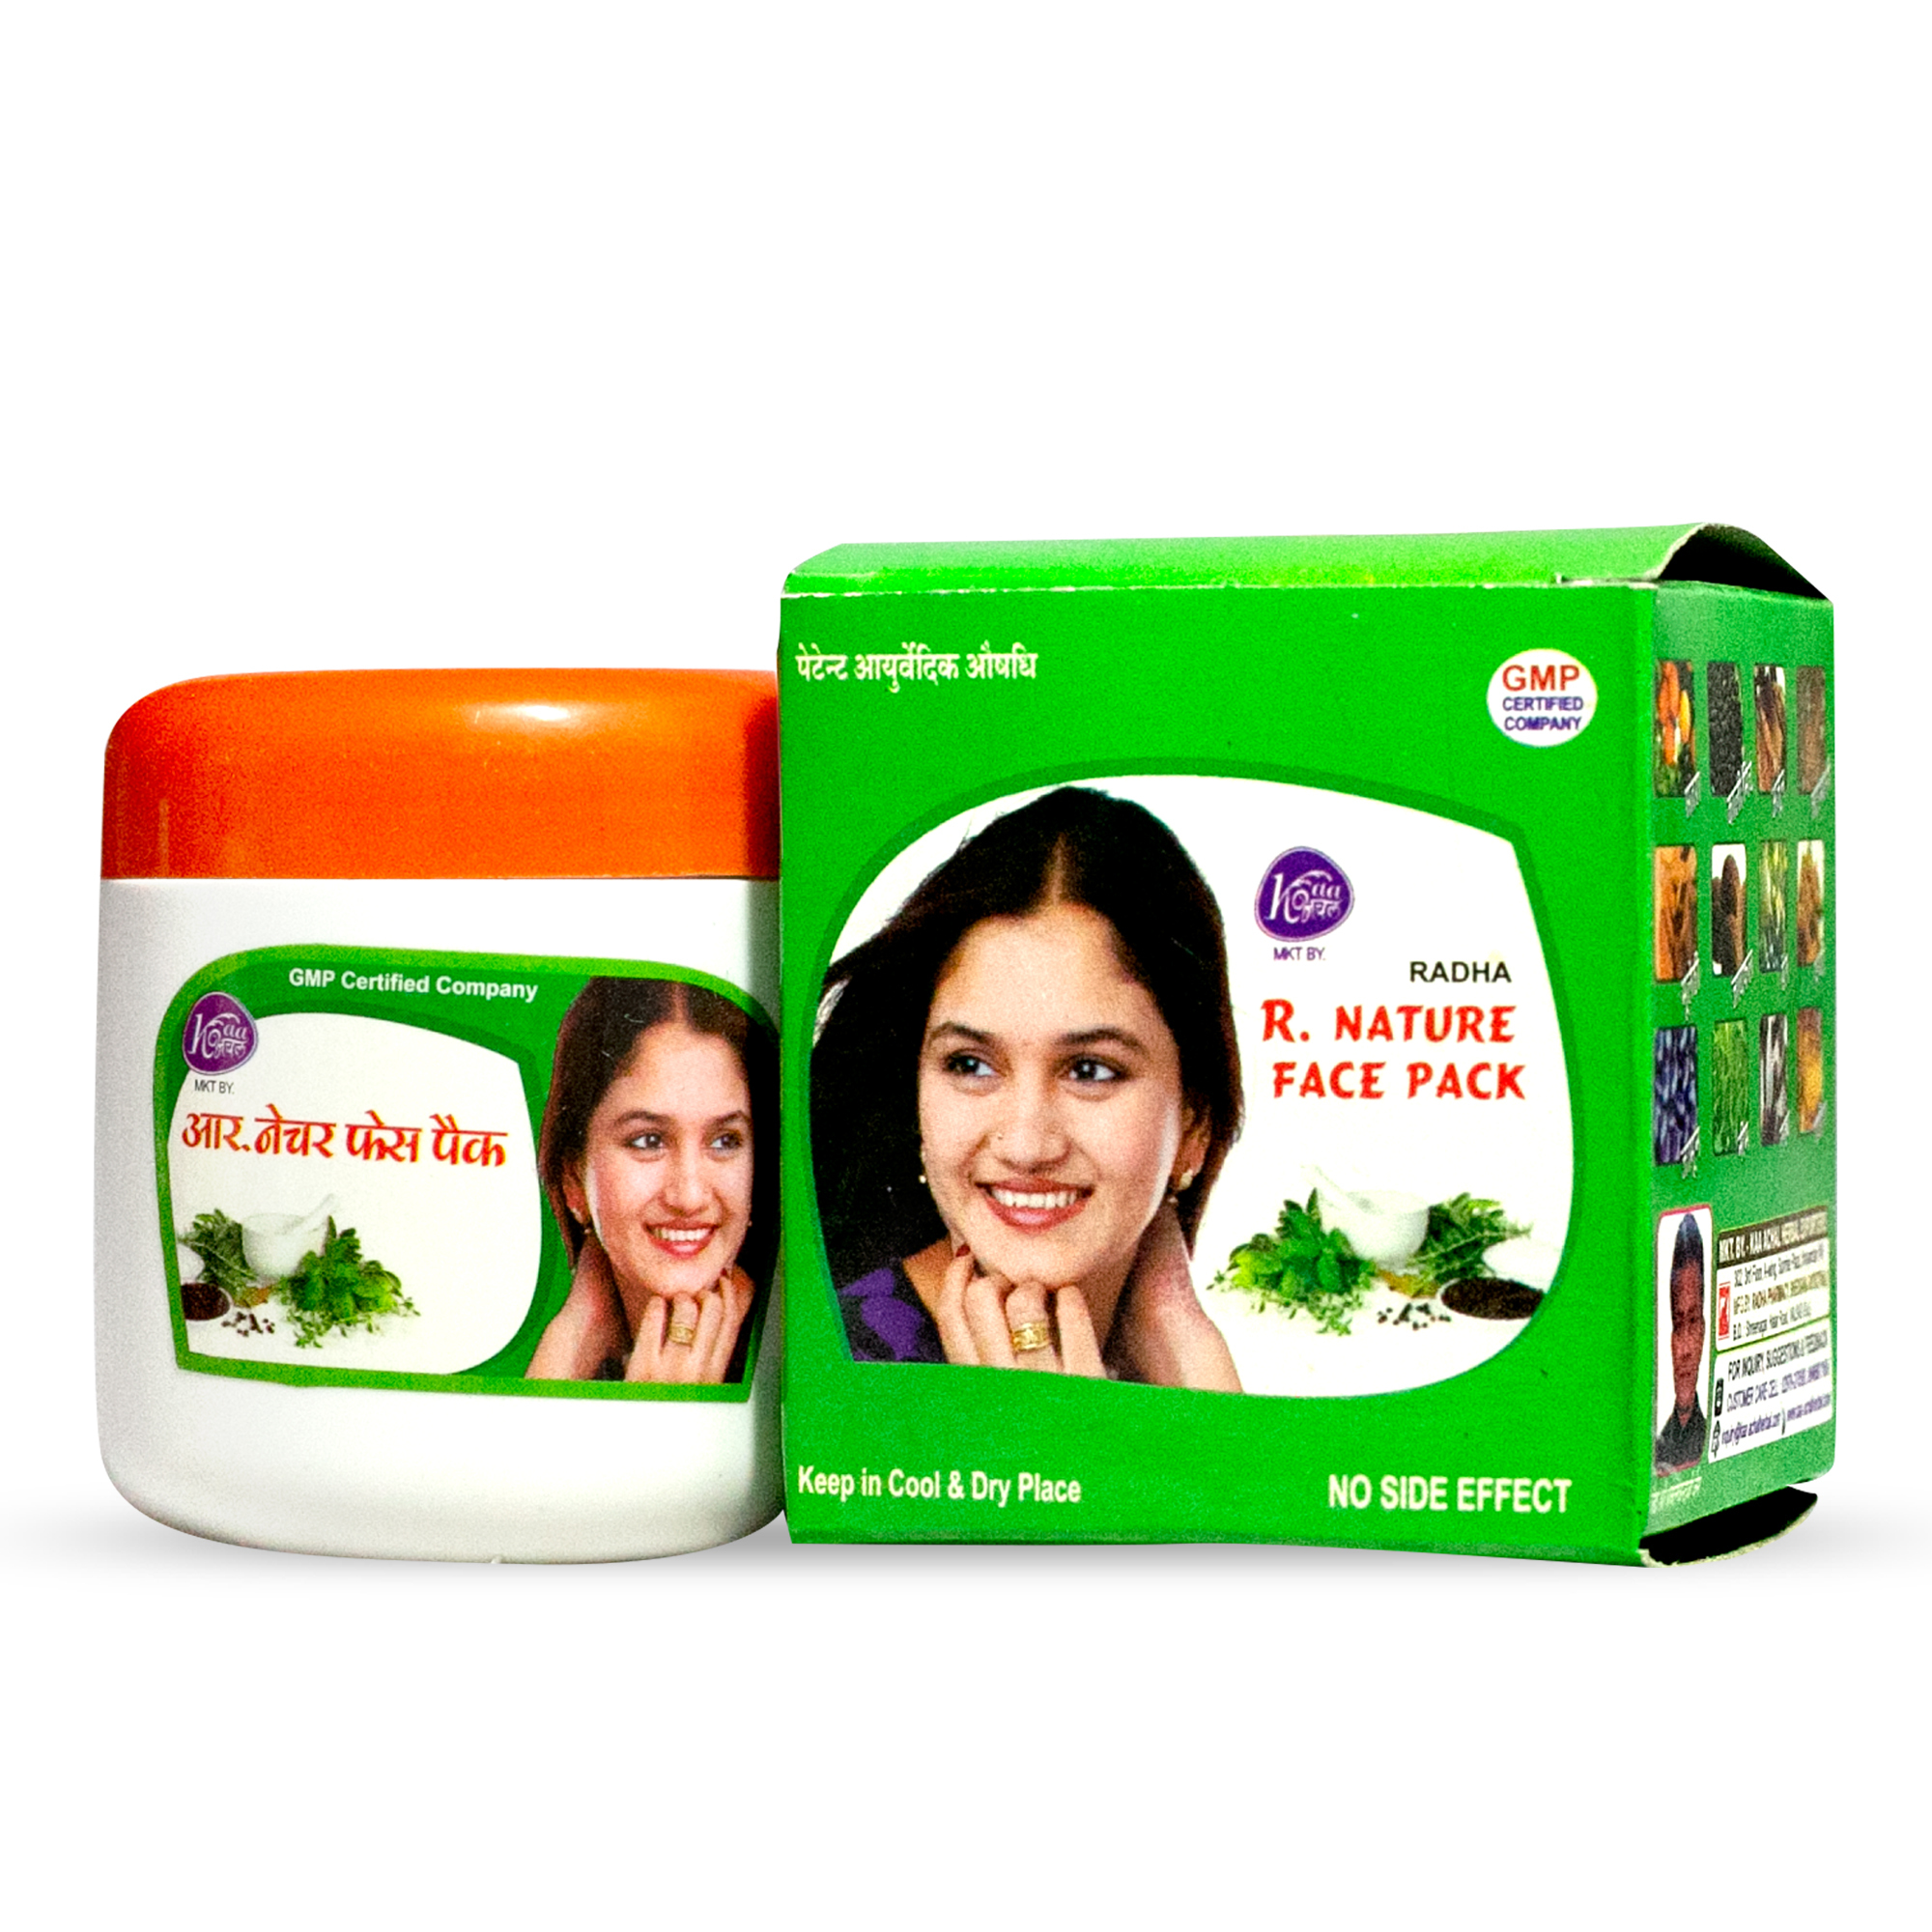 R Nature Face Pack